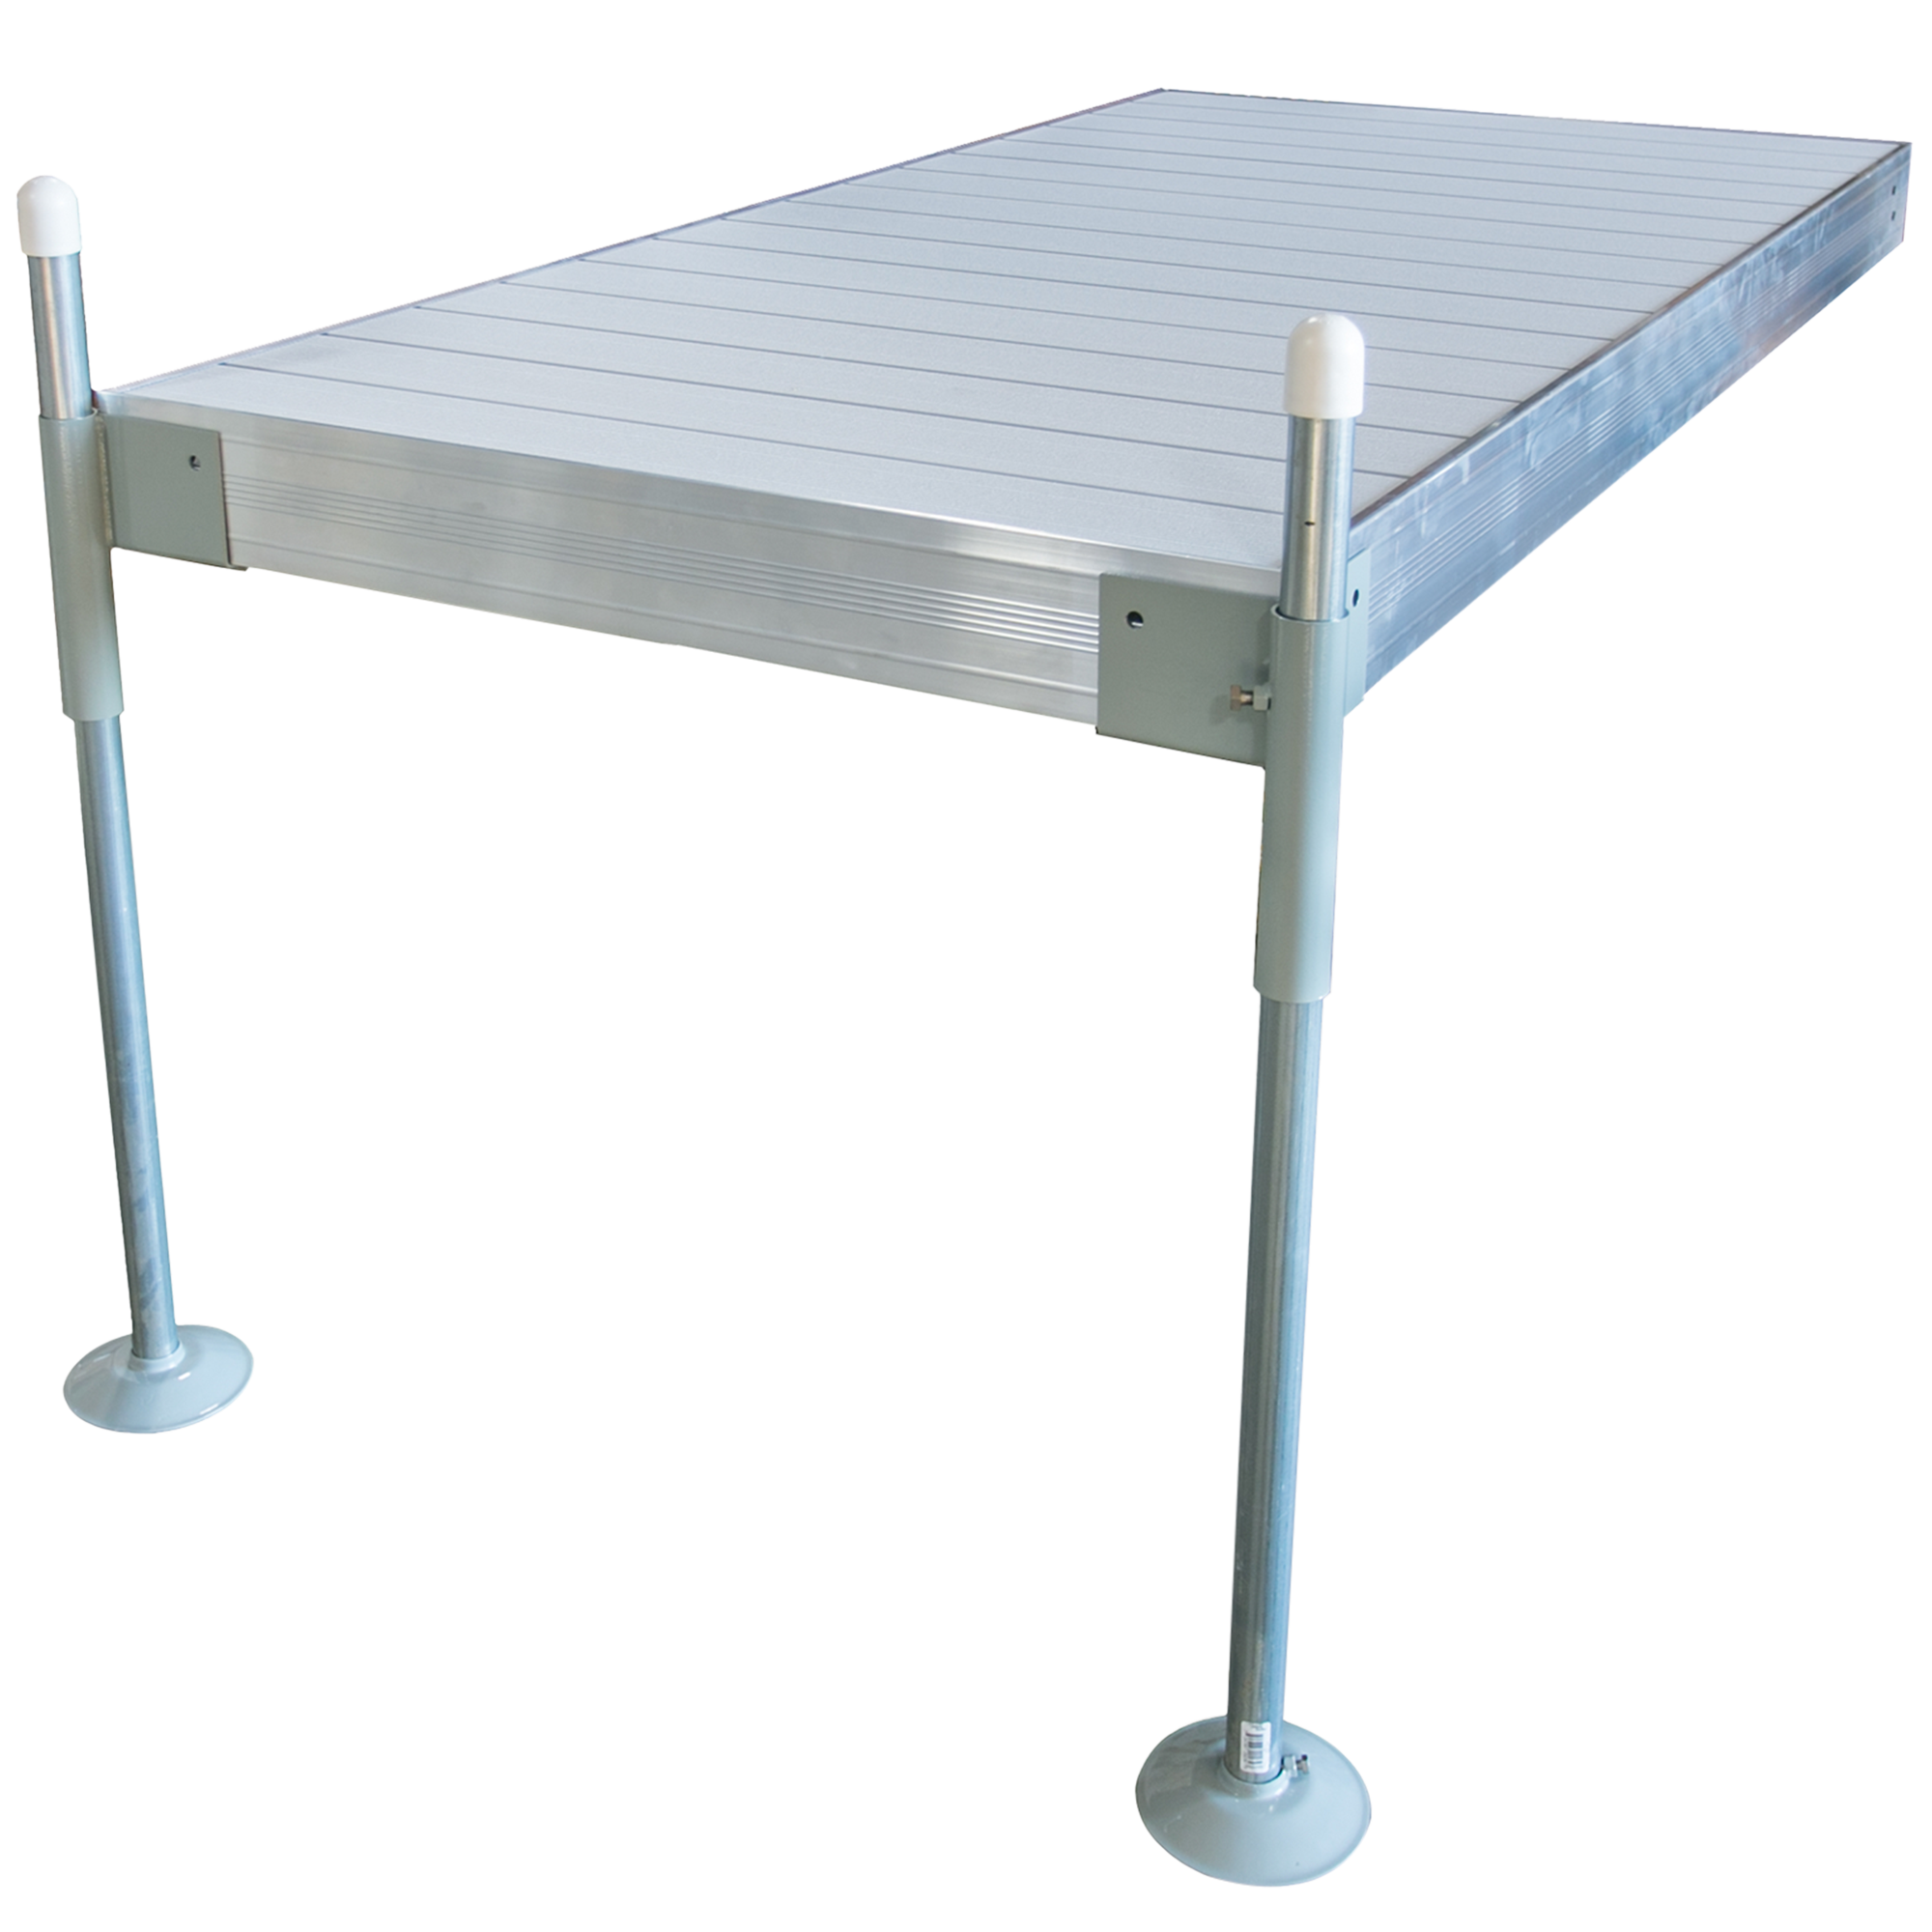  Tommy Docks Complete Dock Package - 8 FT Straight